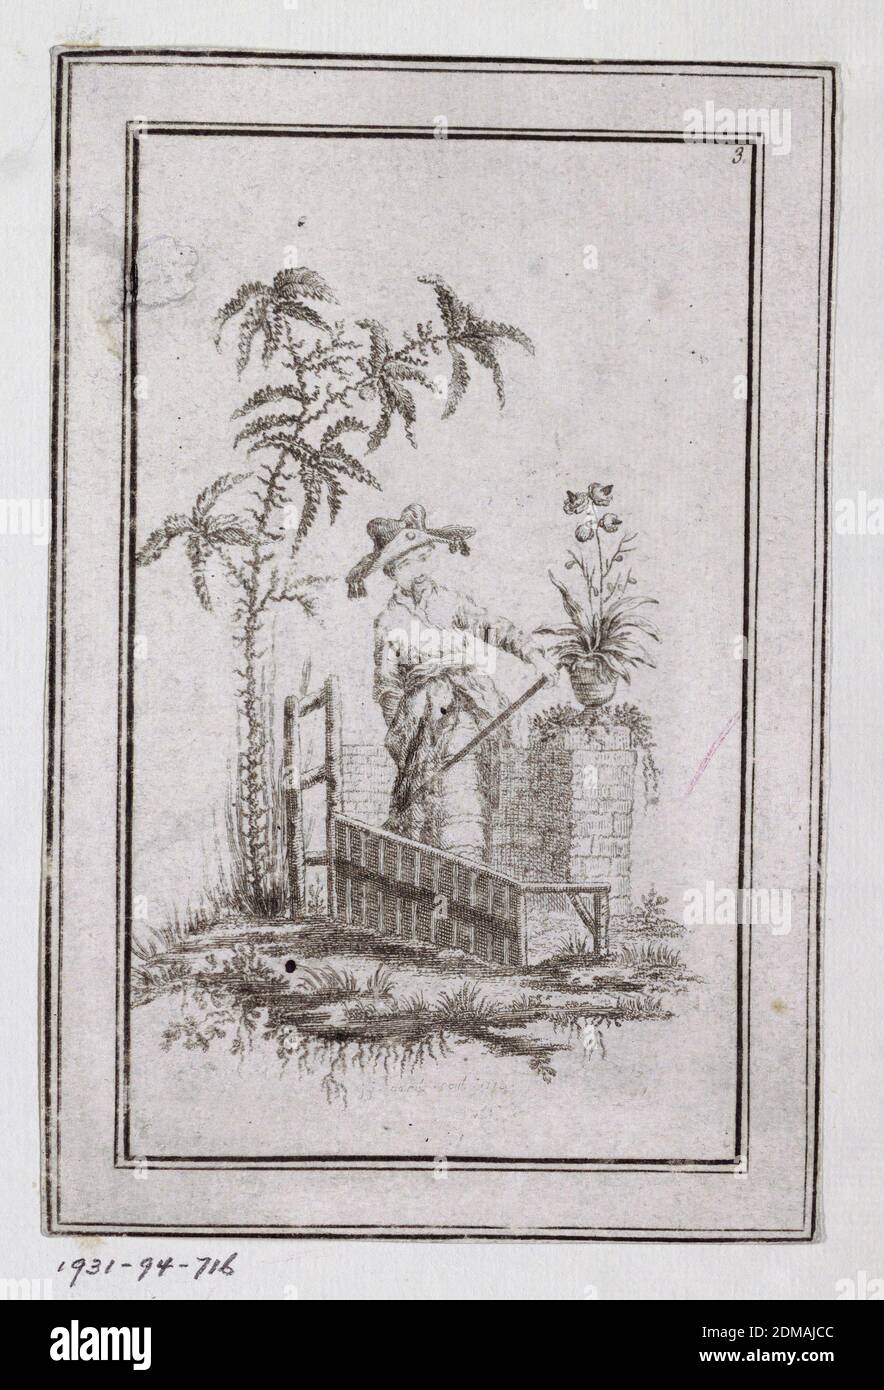 Chinoiserie, Jean-Baptiste Pillement, French, 1728–1808, Engraving on paper, France, Europe, 18th century, Print Stock Photo